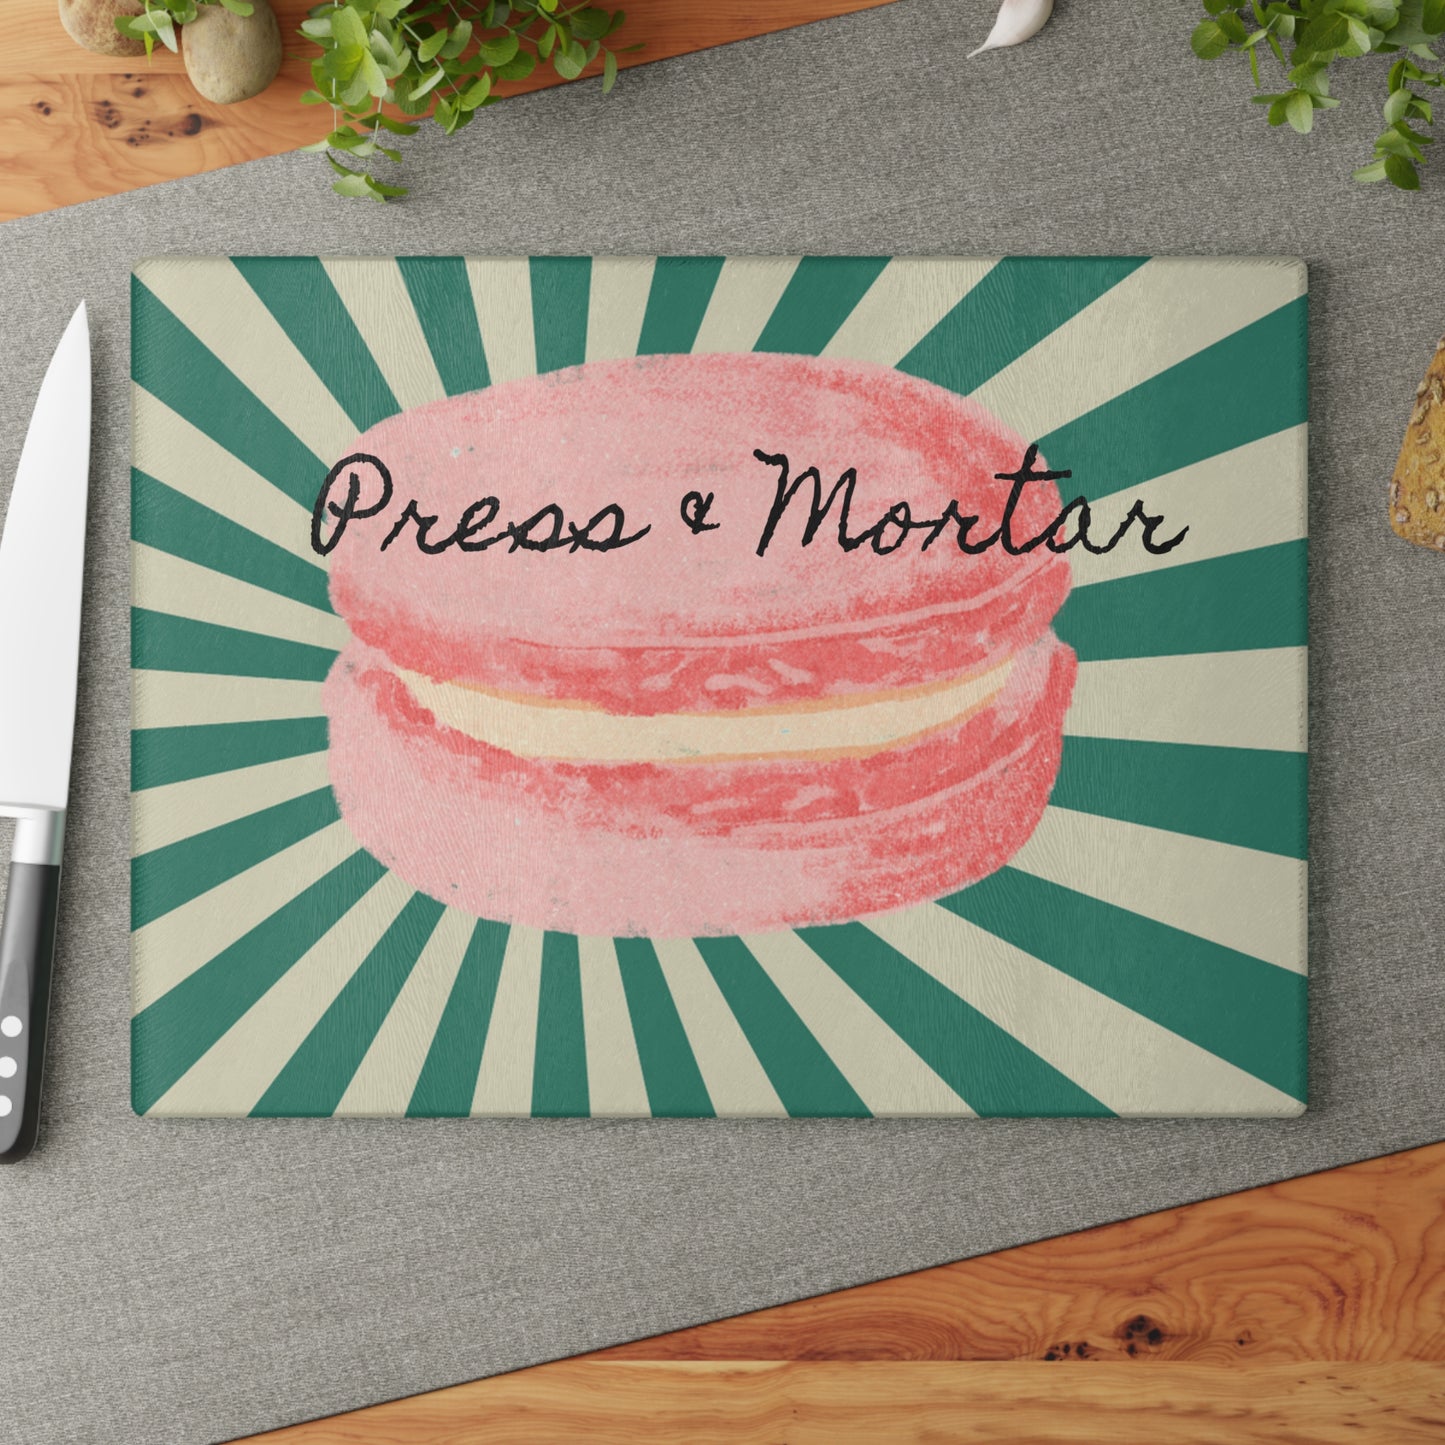 Kitchen Stash- Glass Cutting Board Pink Macron with Green and White Lines